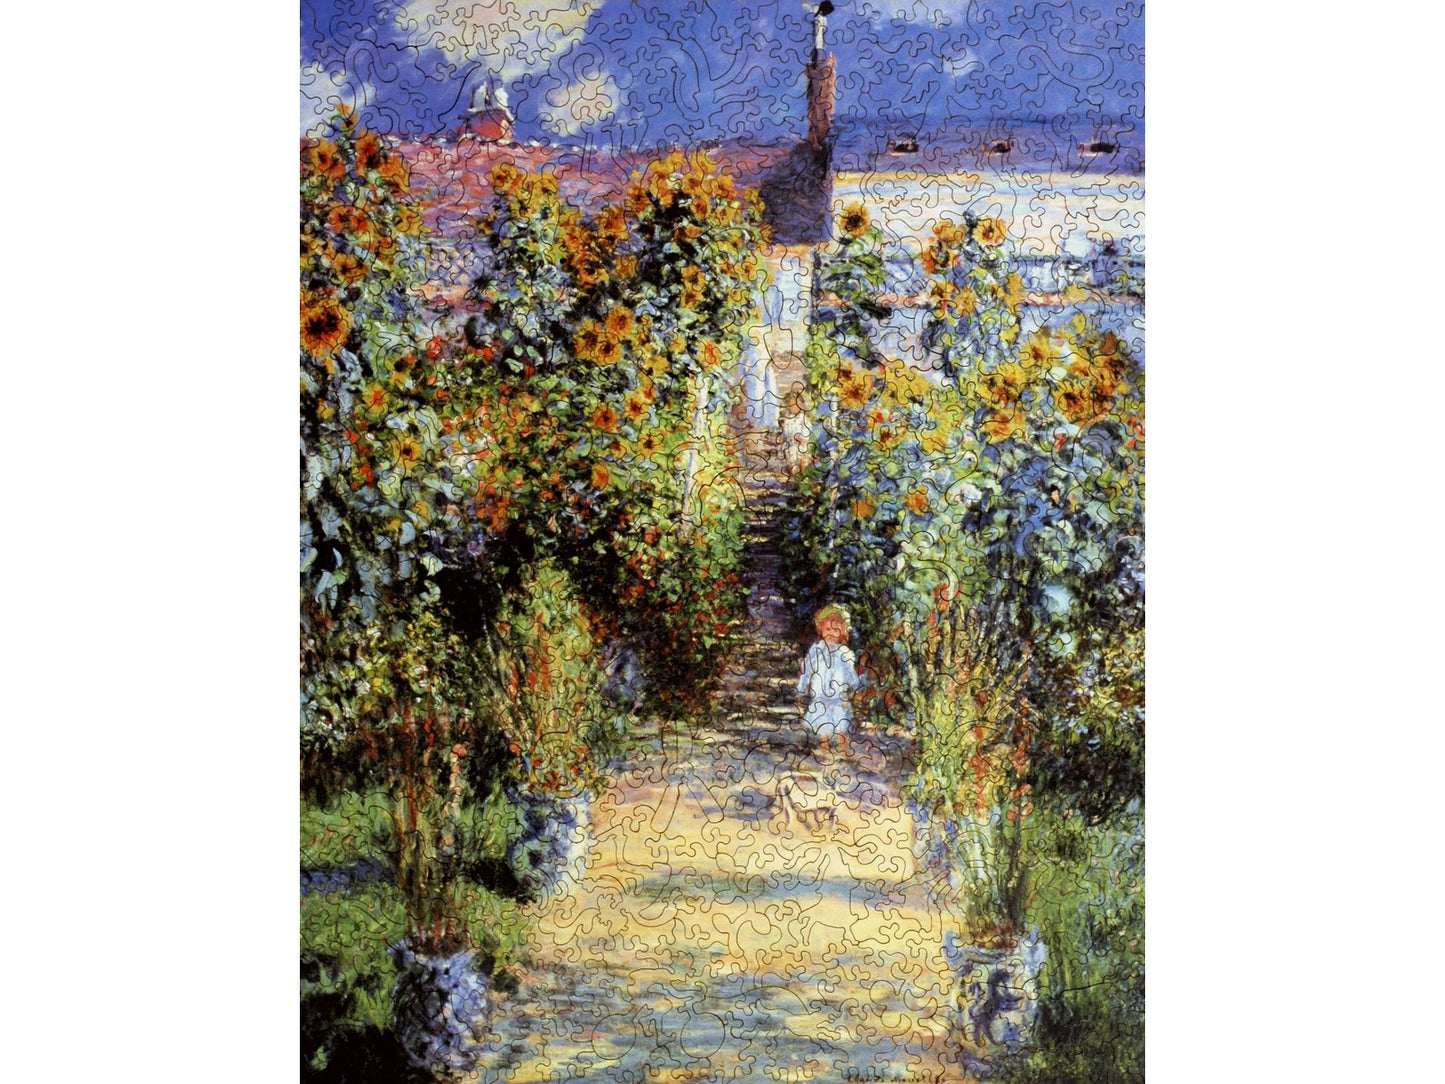 The front of the puzzle, The Artist's Garden at Vetheuil, which shows a child on a garden path.